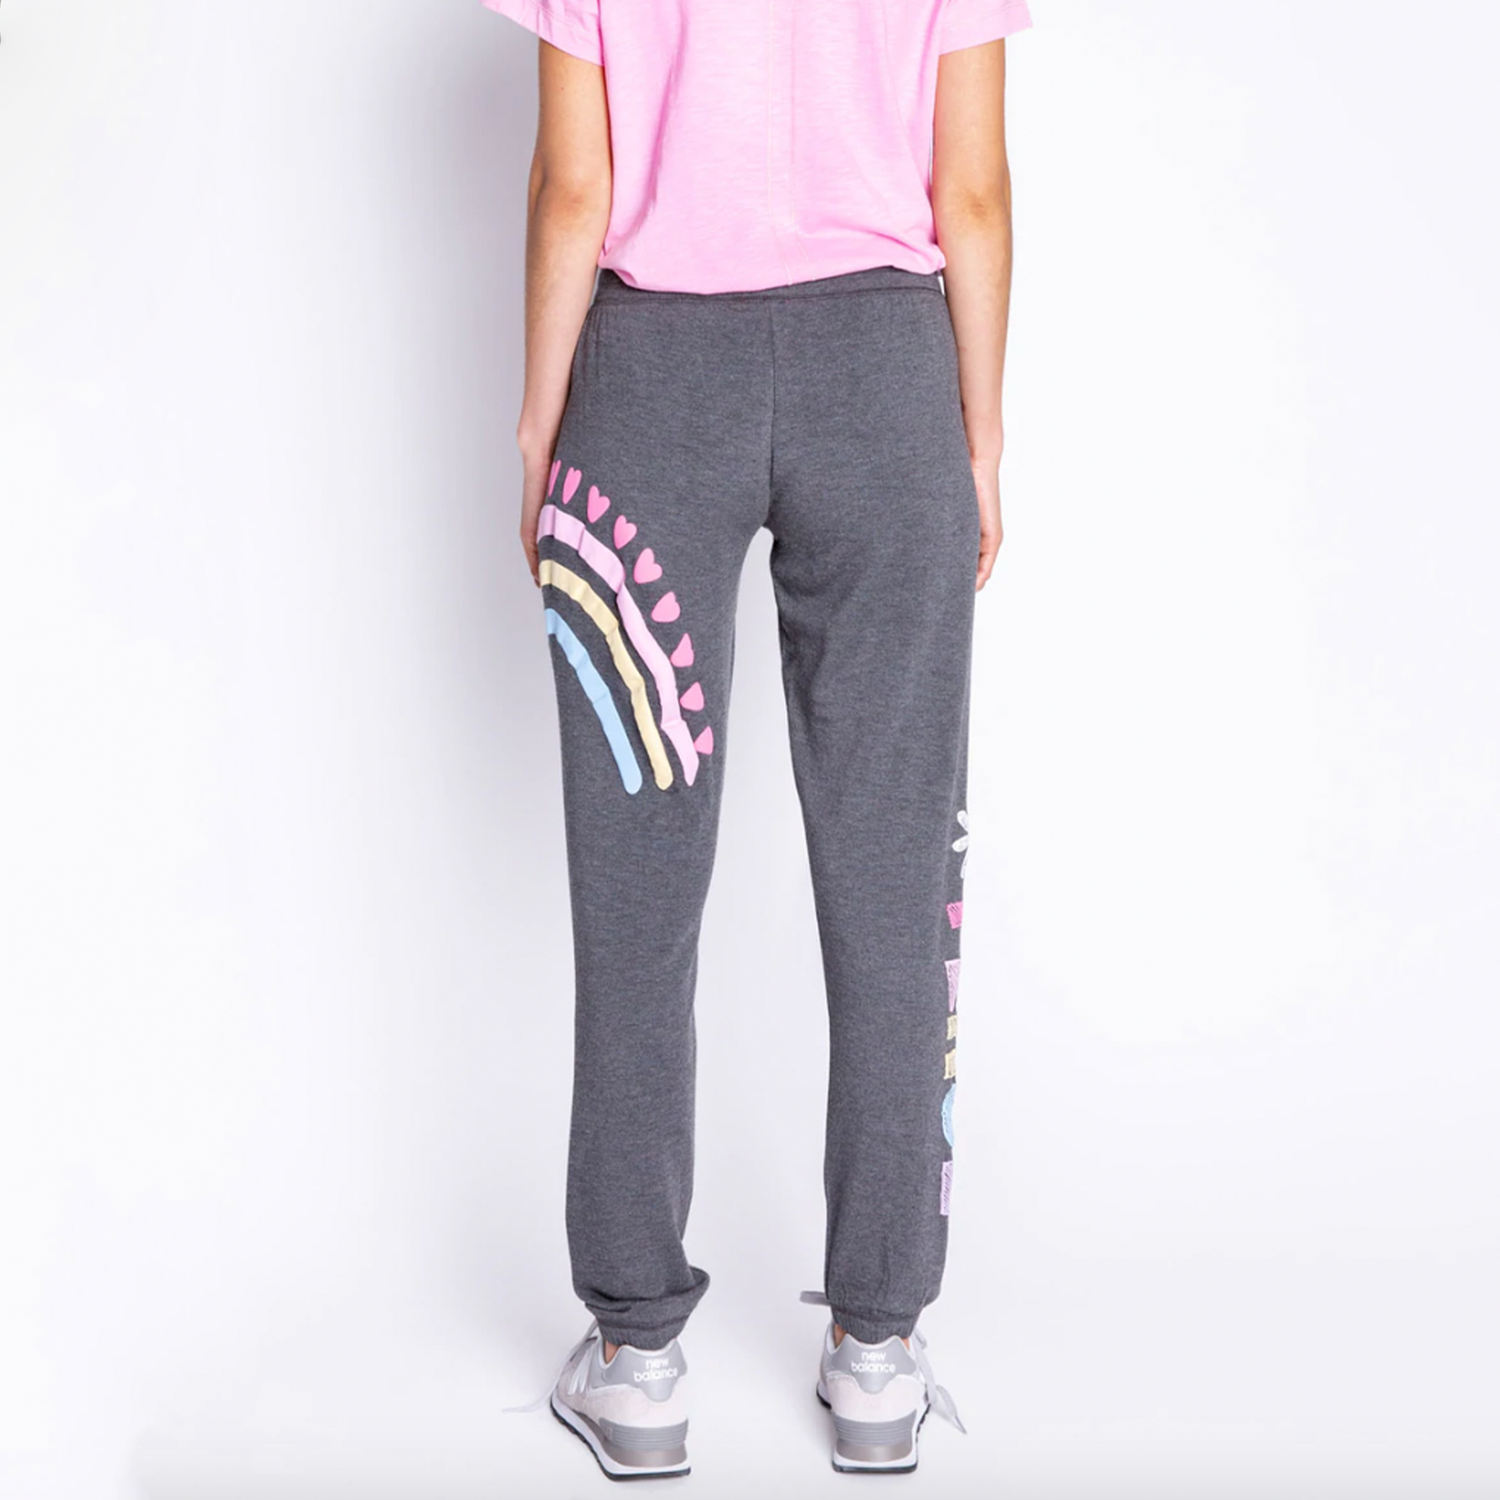 PJ Salvage Peace & Love Banded Pant. Let your good vibes shine! This soft fleece jogger is printed with hearts & peace-signs that make it a statement pant to go with any tee or tank. Designed in the softest fleece, a perfect year-round wear